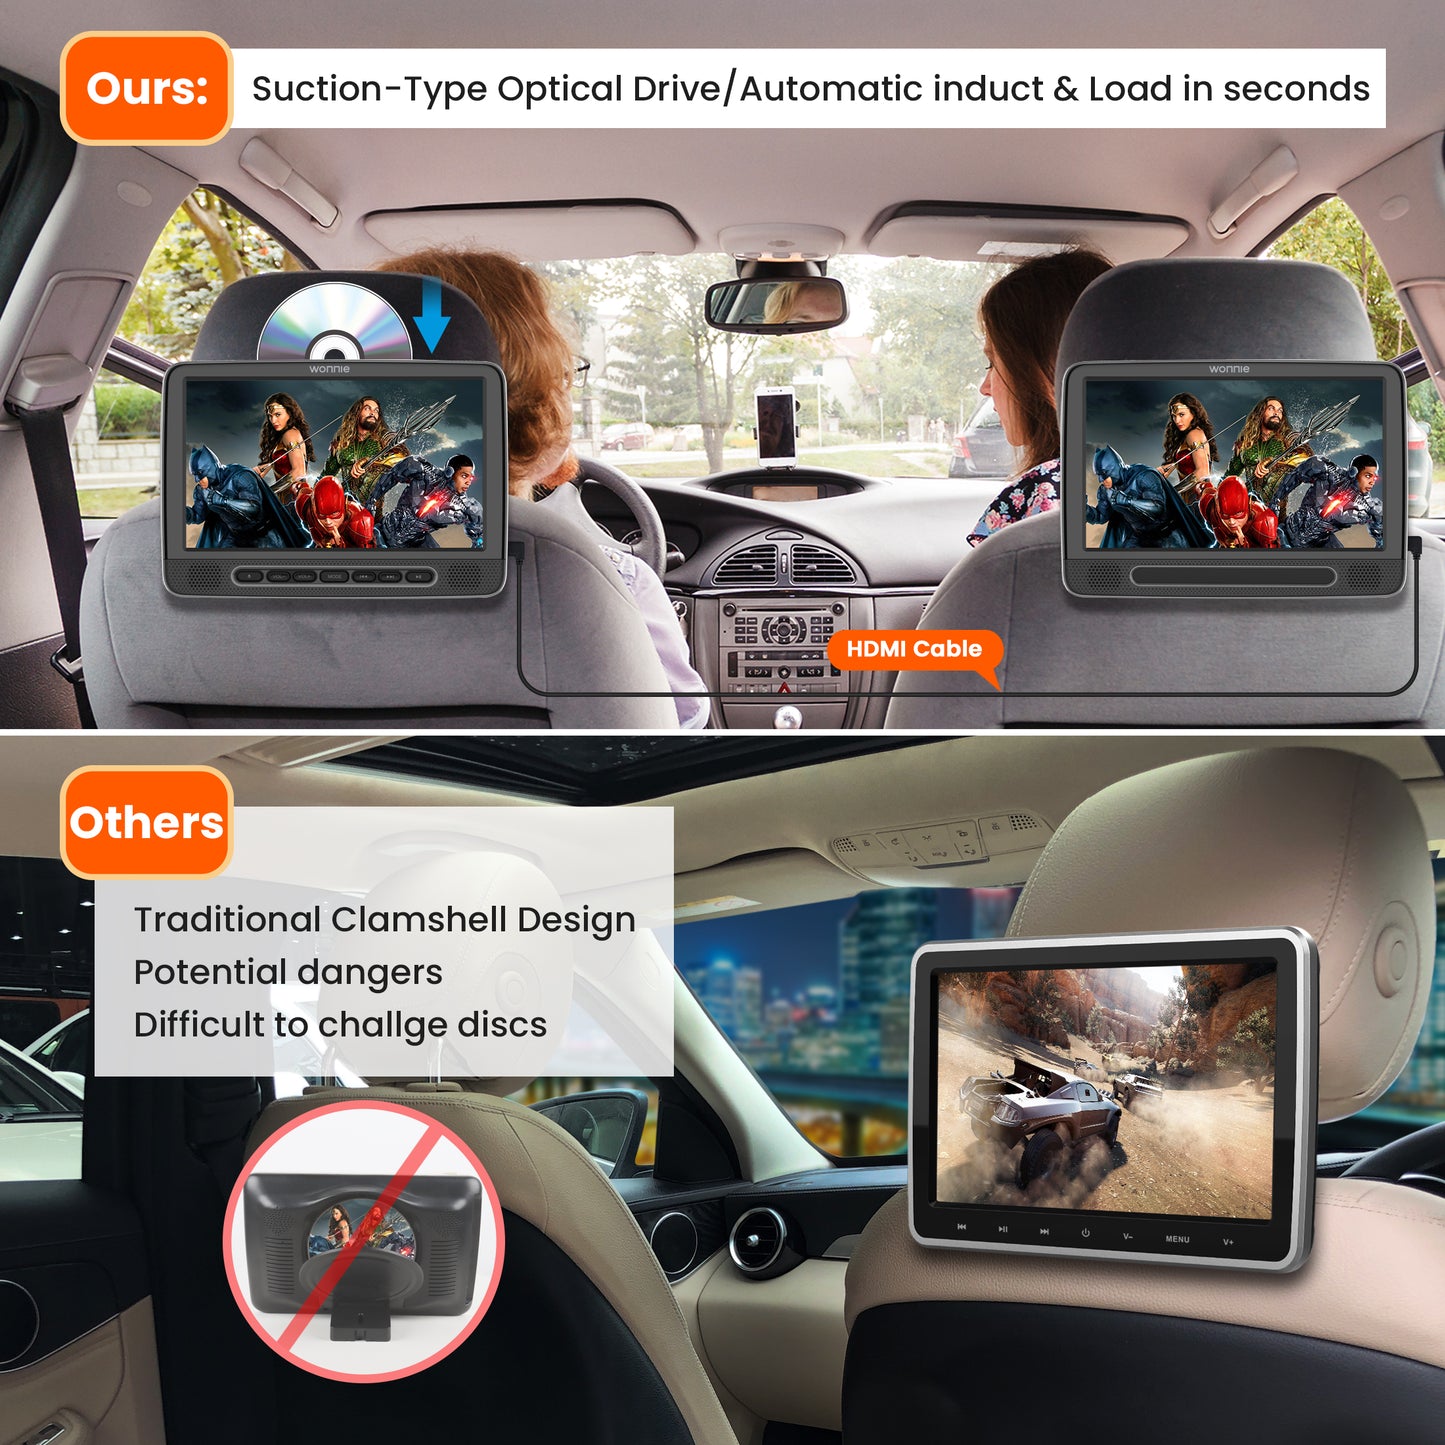 WONNIE 10.5" Dual Screen Portable Headrest DVD Player with Mounting Bracket and Mounting Straps,Car DVD Player Suction-Type Disc in , Full HD 1080P Video,Supports HDMI,USB ,SD,AV Out, Black